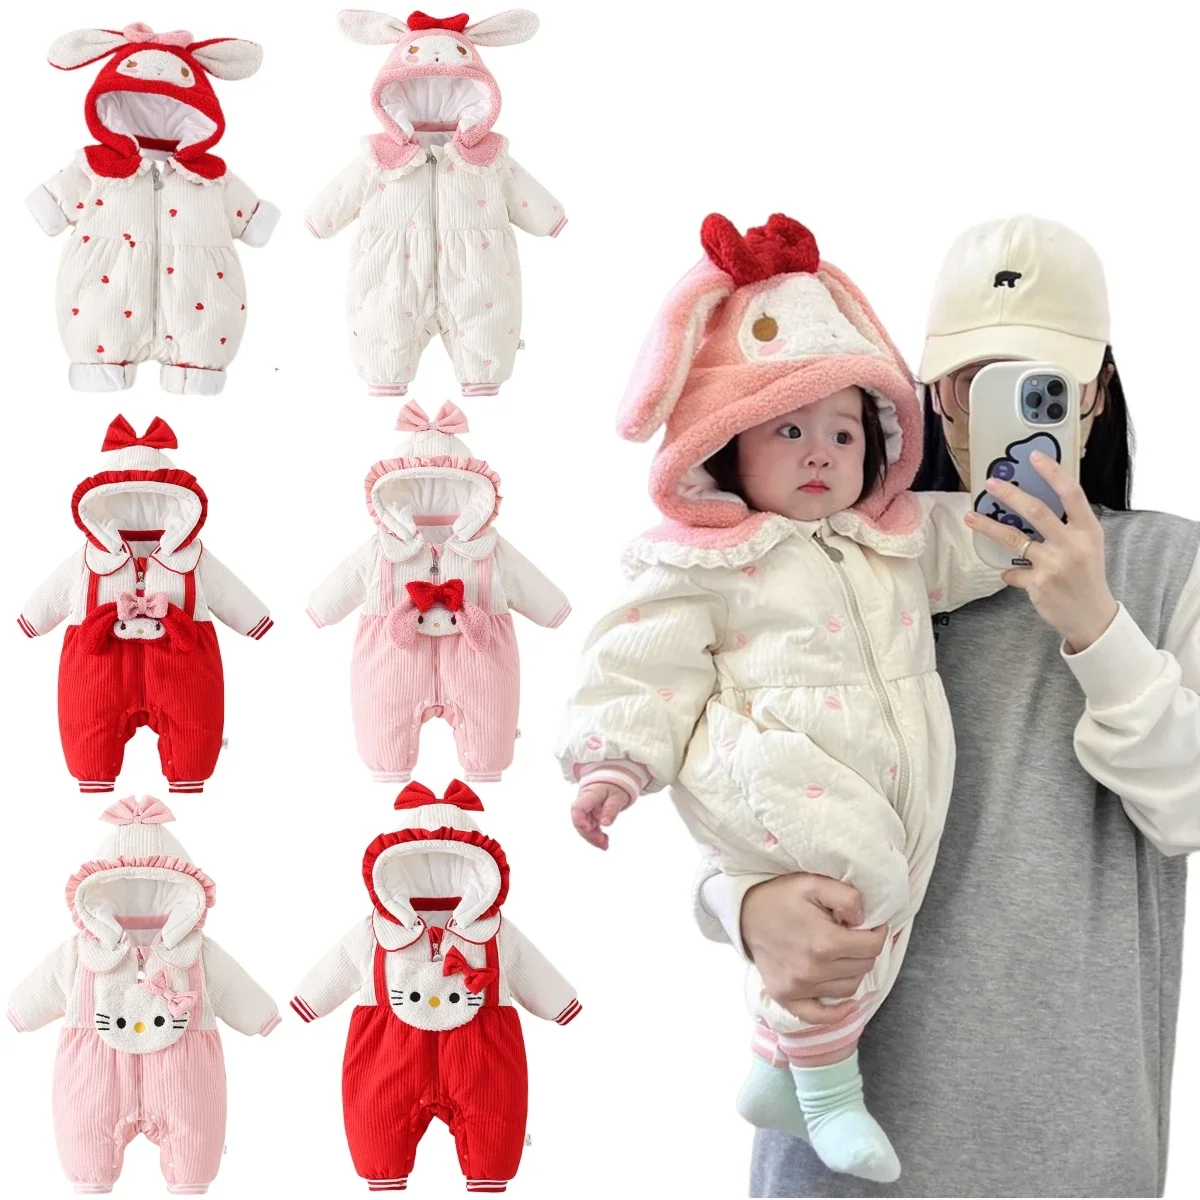 

Anime Sanrios My Melody Hellokittys Children Winter Cotton Clothing Rompers Pajamas Cartoon Baby Thickened Warm Hooded Jumpsuit